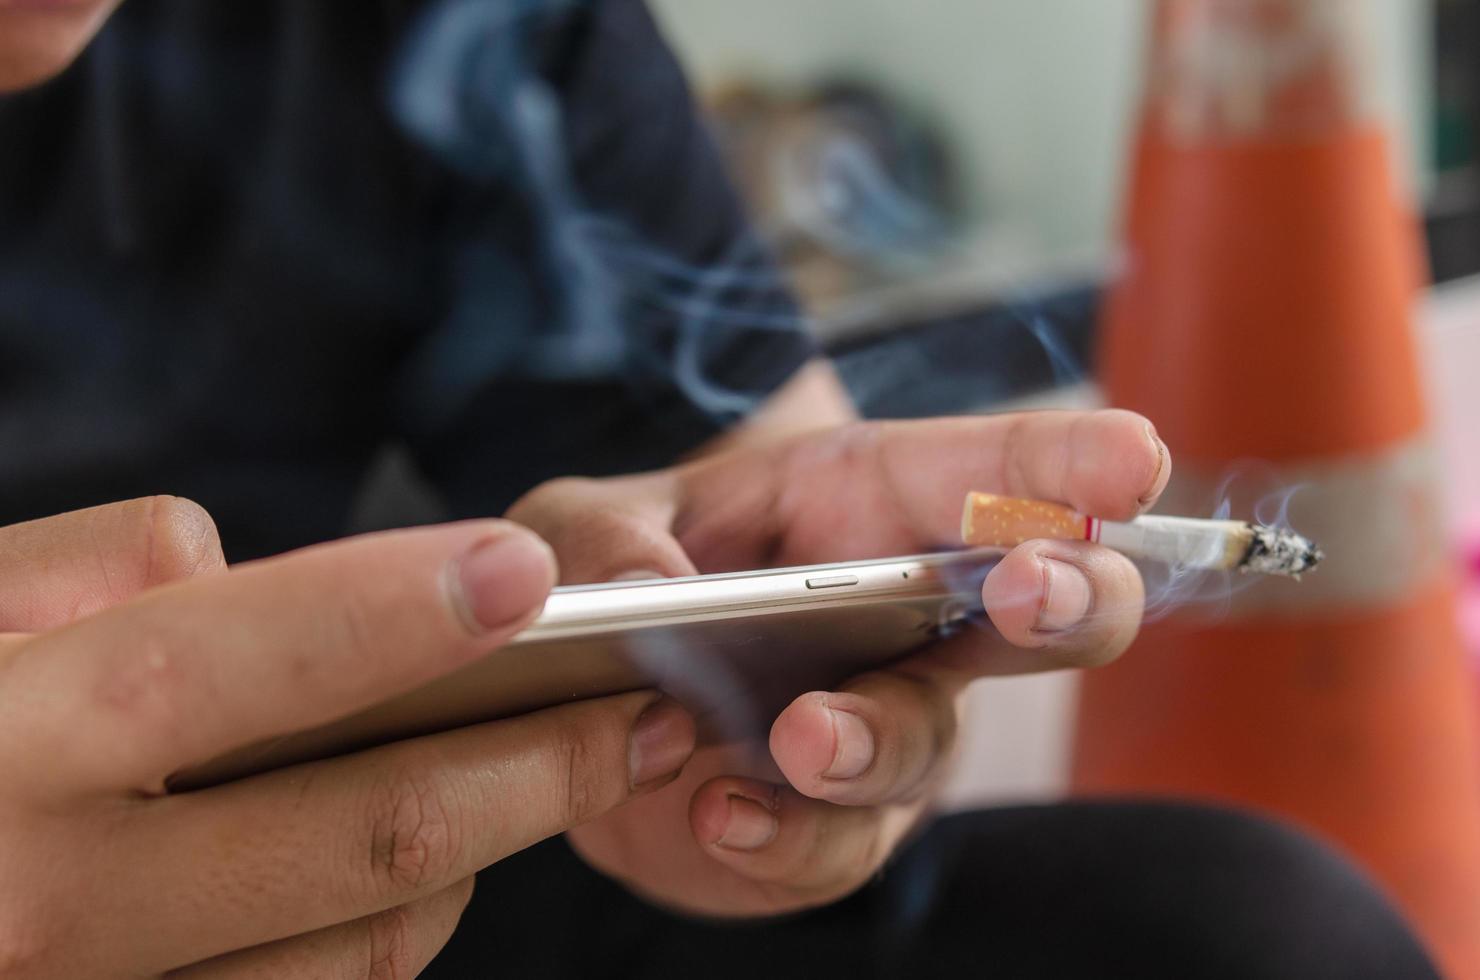 Person smoking a cigarette while texting on a smart phone photo